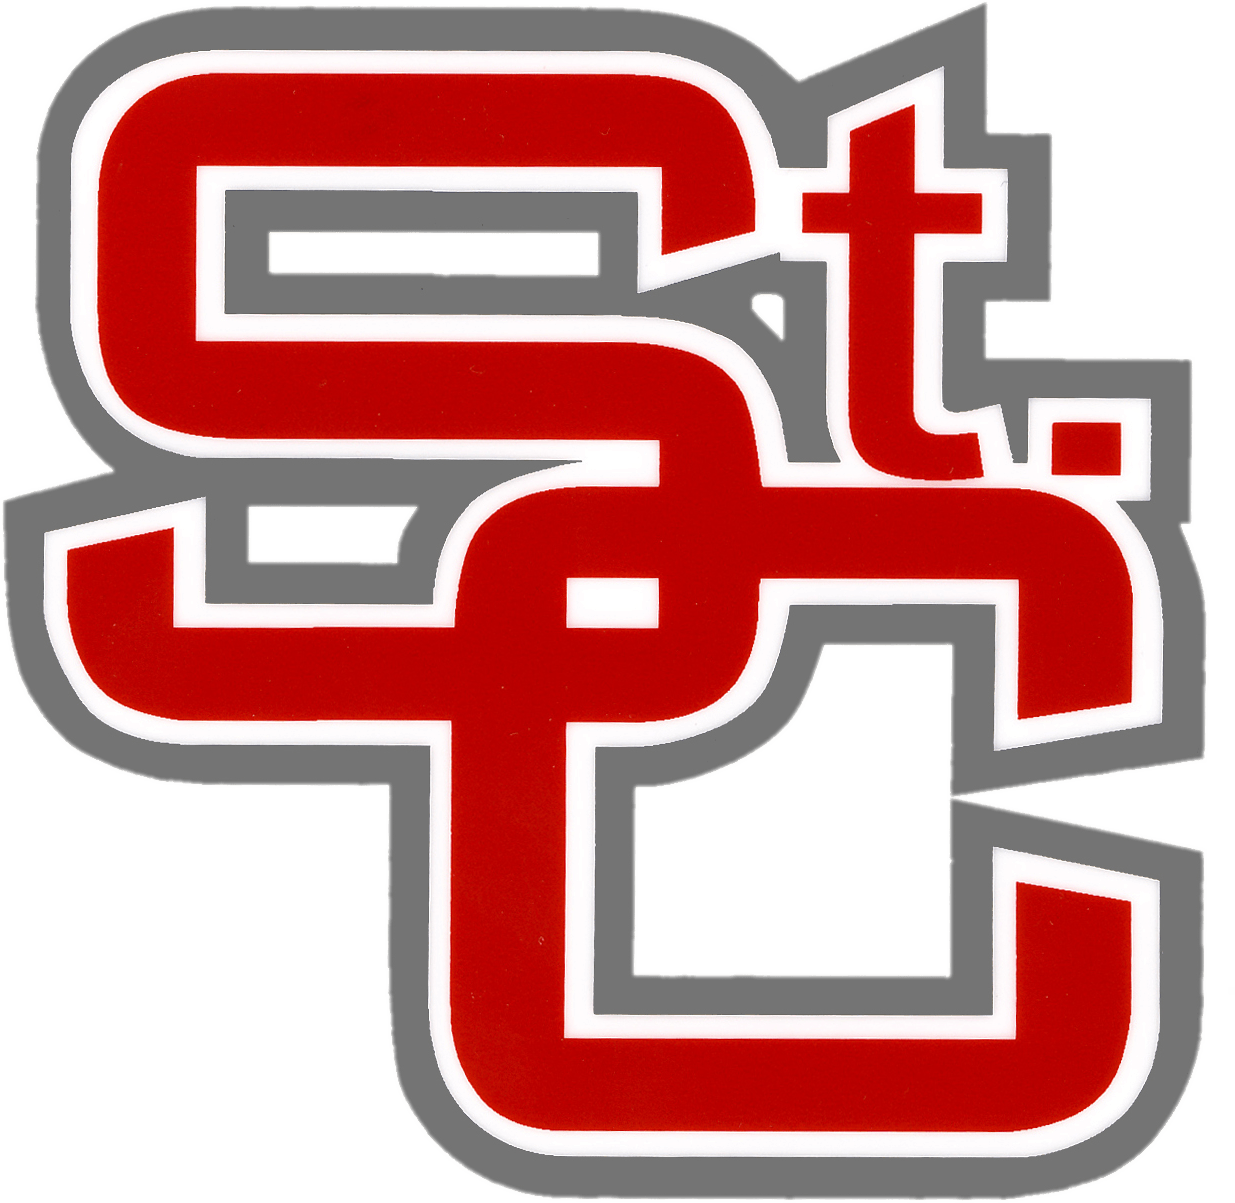 For School Red Devils Logo - St. Clairsville Home St. Clairsville Red Devils Sports